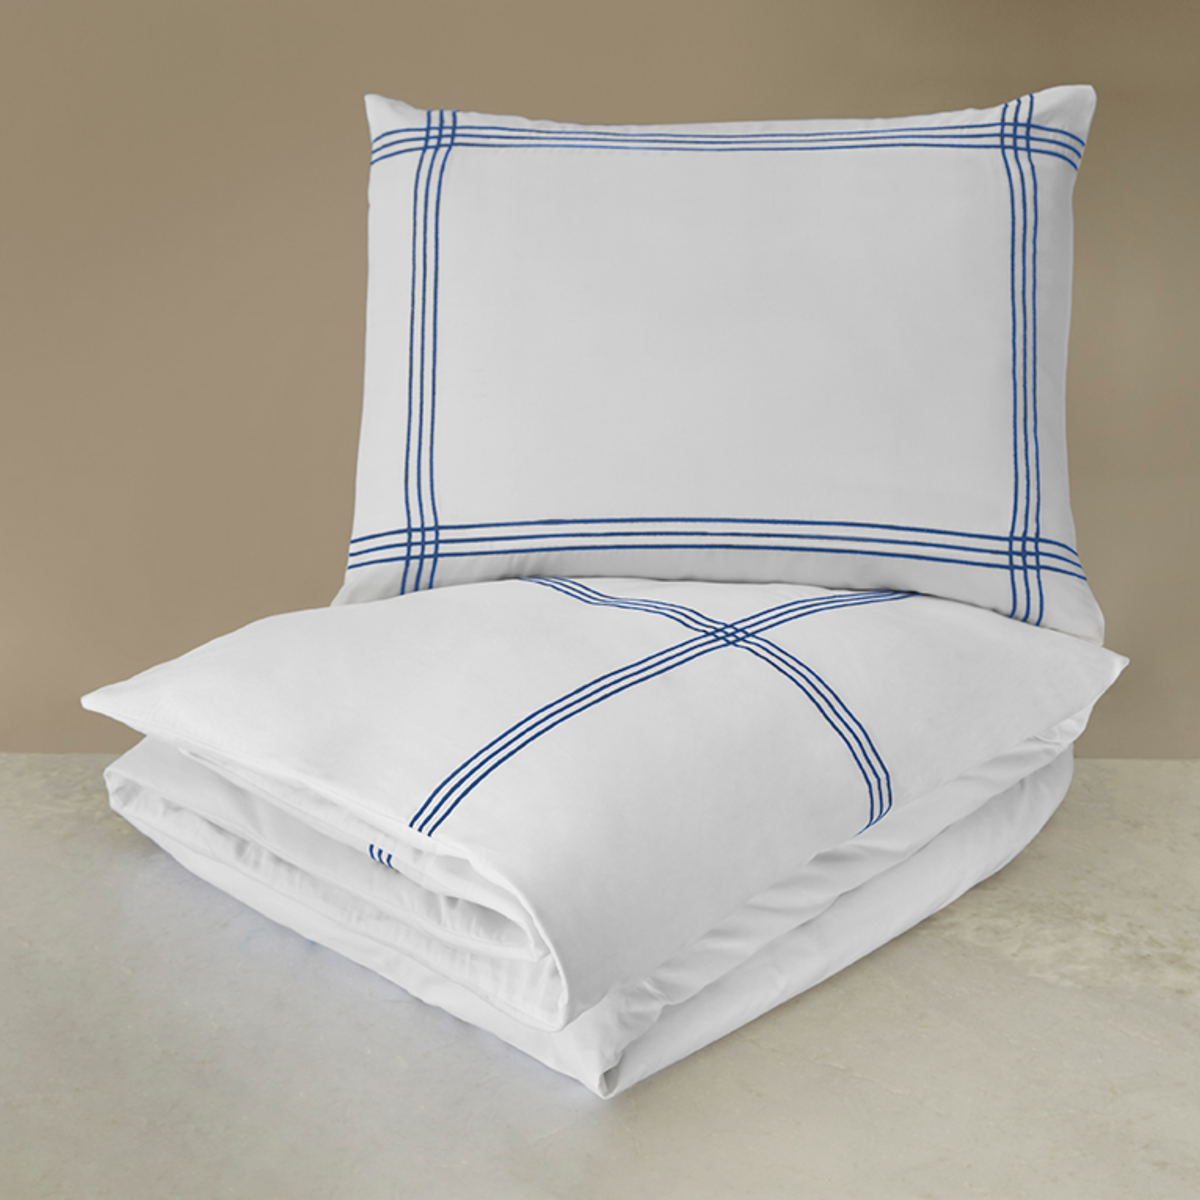 Duvet Set of Downtown Company Madison Bedding Collection in Blue Color